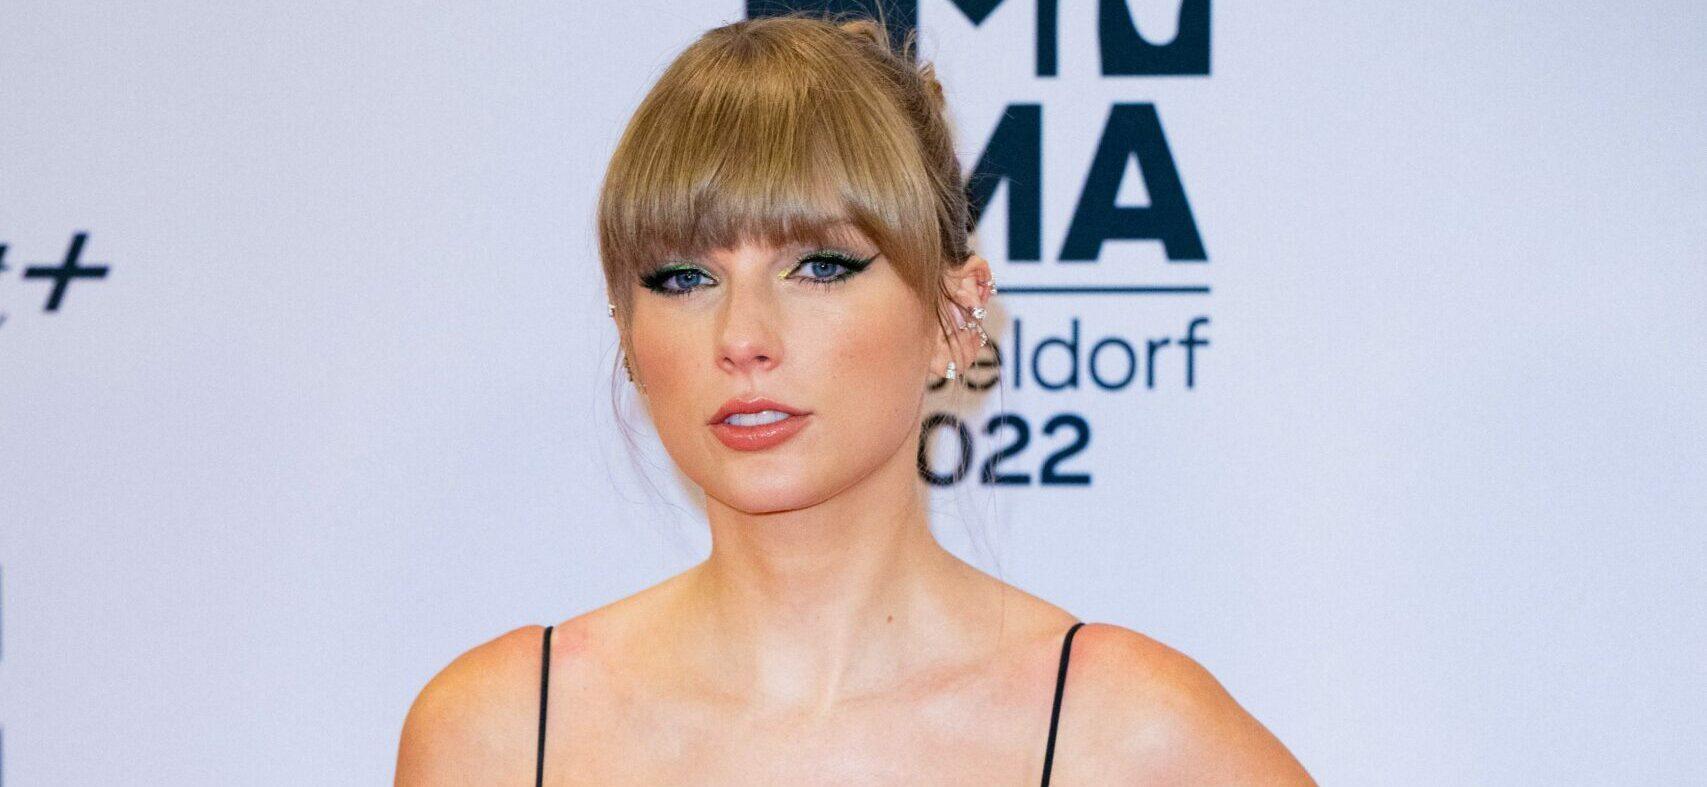 Taylor Swift Rings In Her 33rd Birthday After ‘Shake It Off’ Copyright Lawsuit Dropped